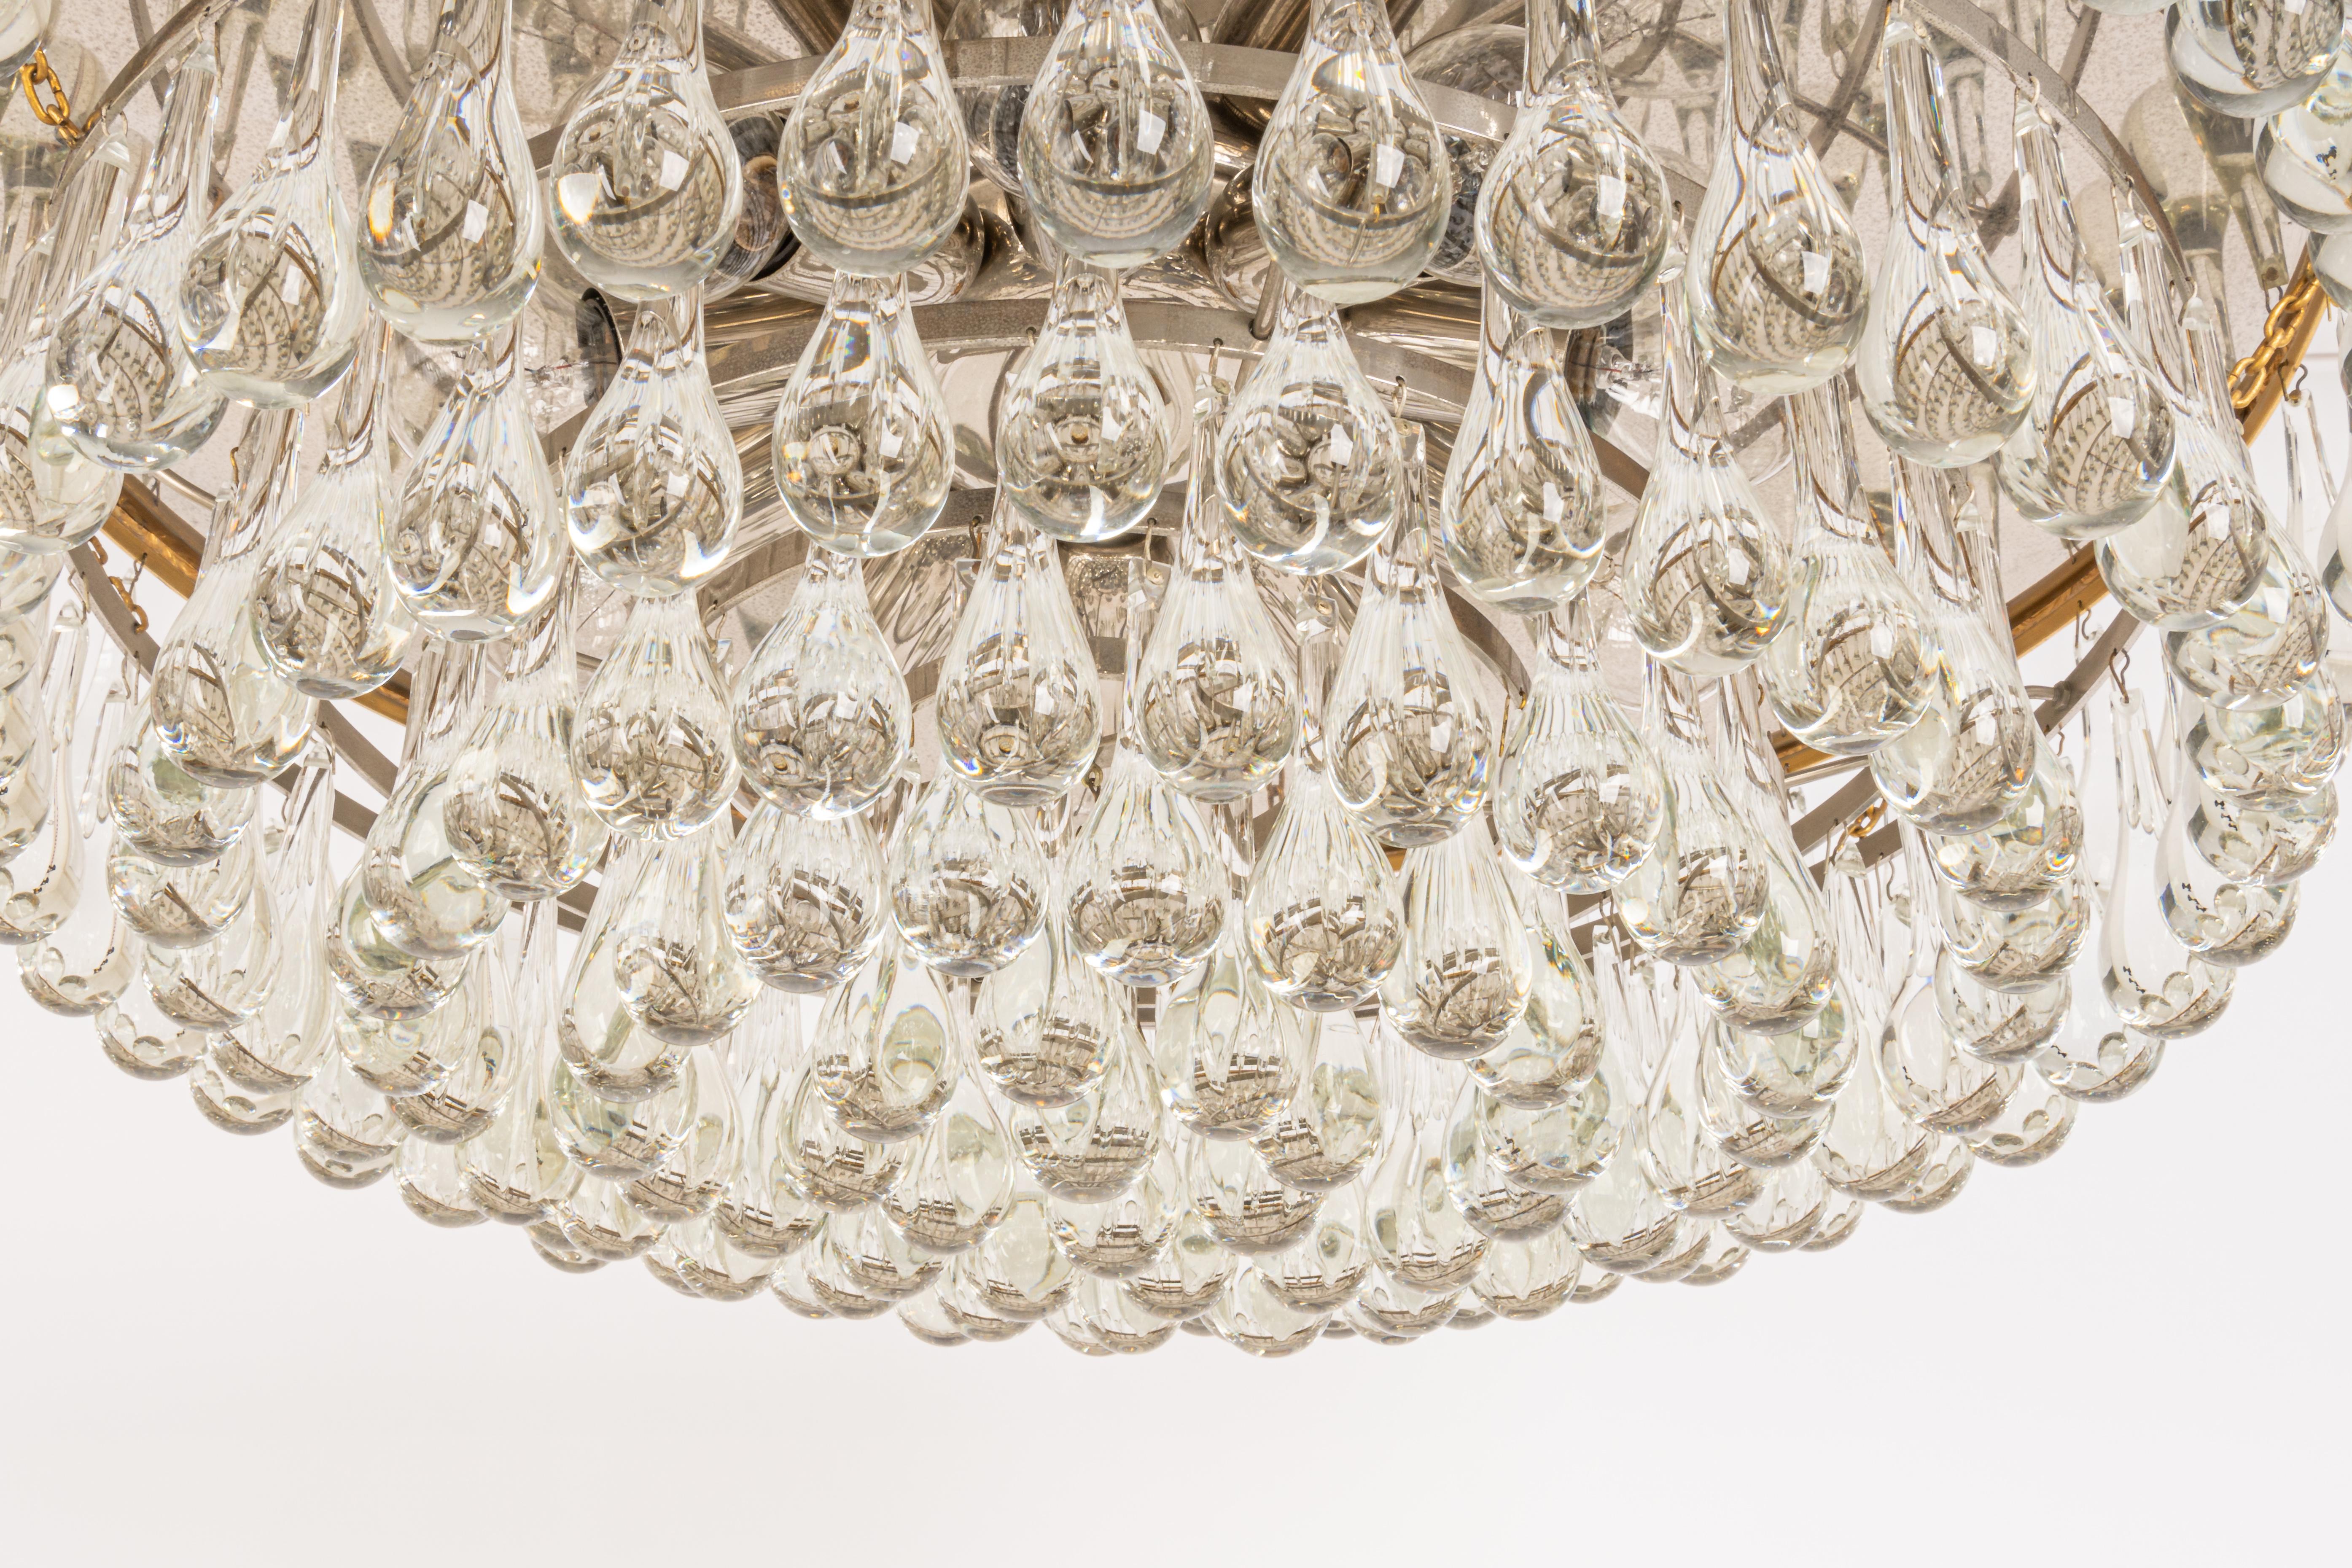 Large Murano Glass Tear Drop Chandelier by C.Palme, Germany, 1970s For Sale 4